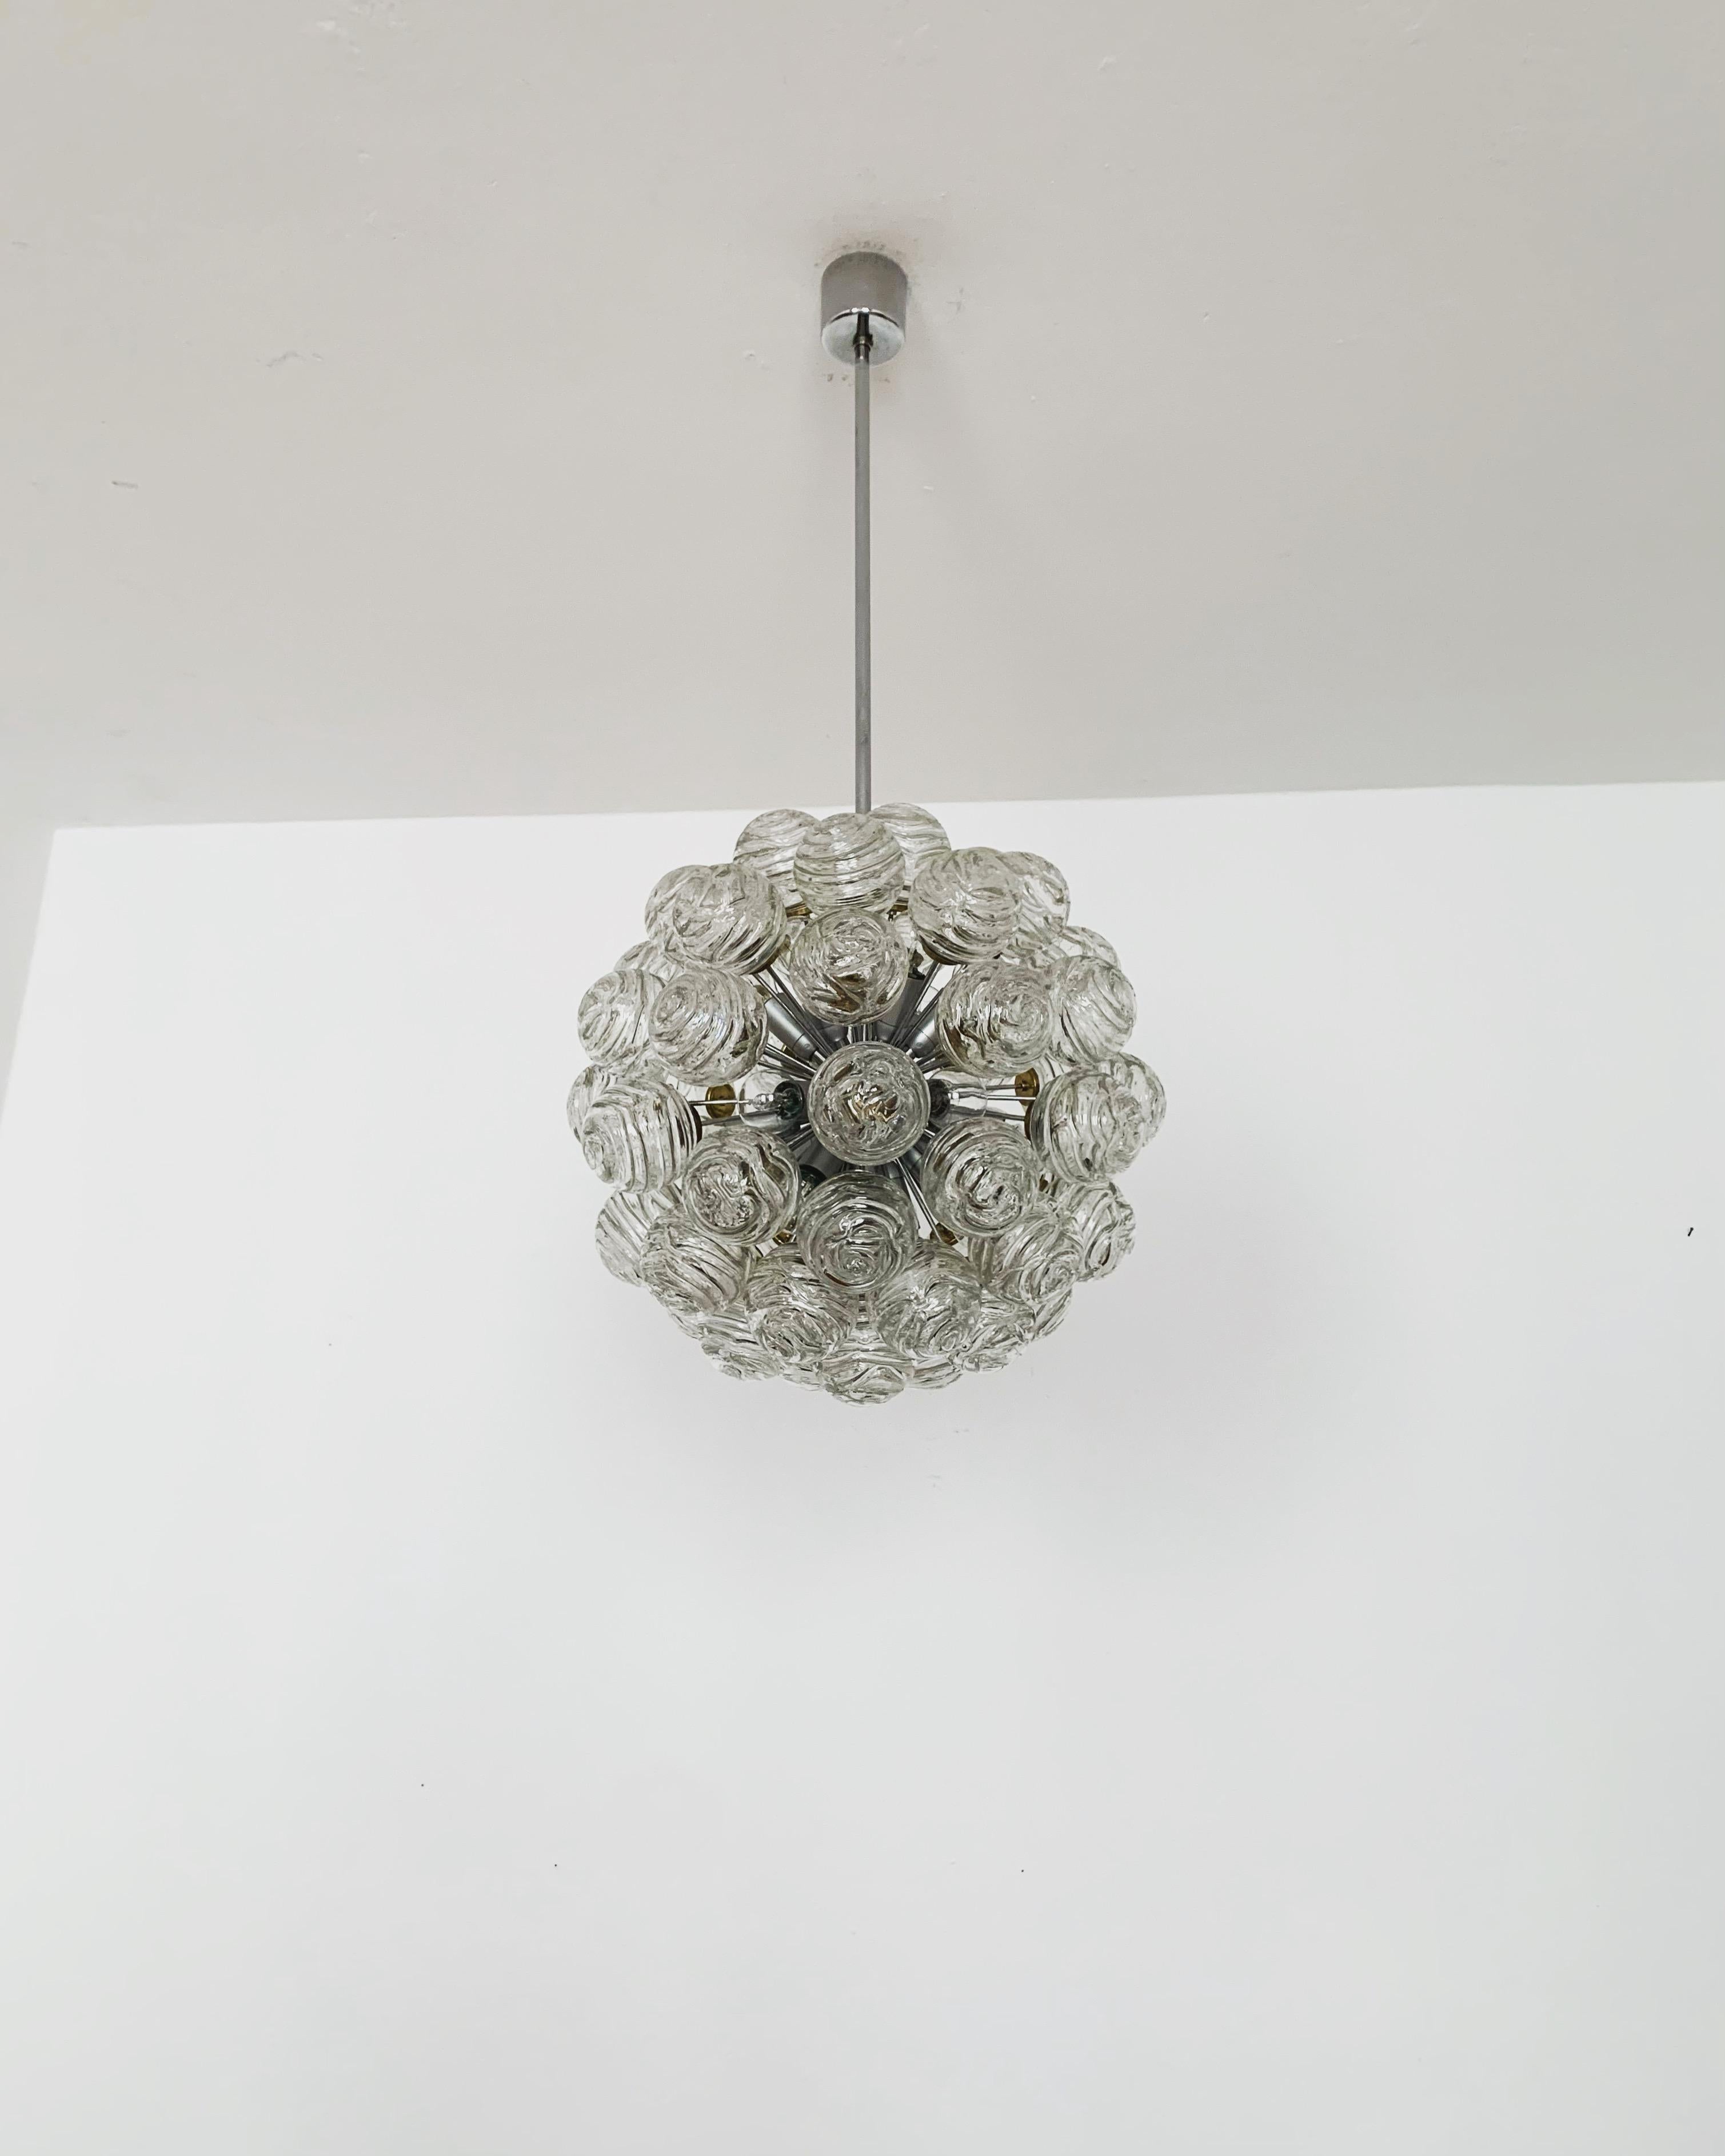 Fabulous bubble glass Sputnik chandelier from the 1960's.
The lamp with the 55 glass balls is very noble.
The structure in the glass shades creates a spectacular play of light.
An absolute eye-catcher.

Manufacturer: Doria

Condition:

Very